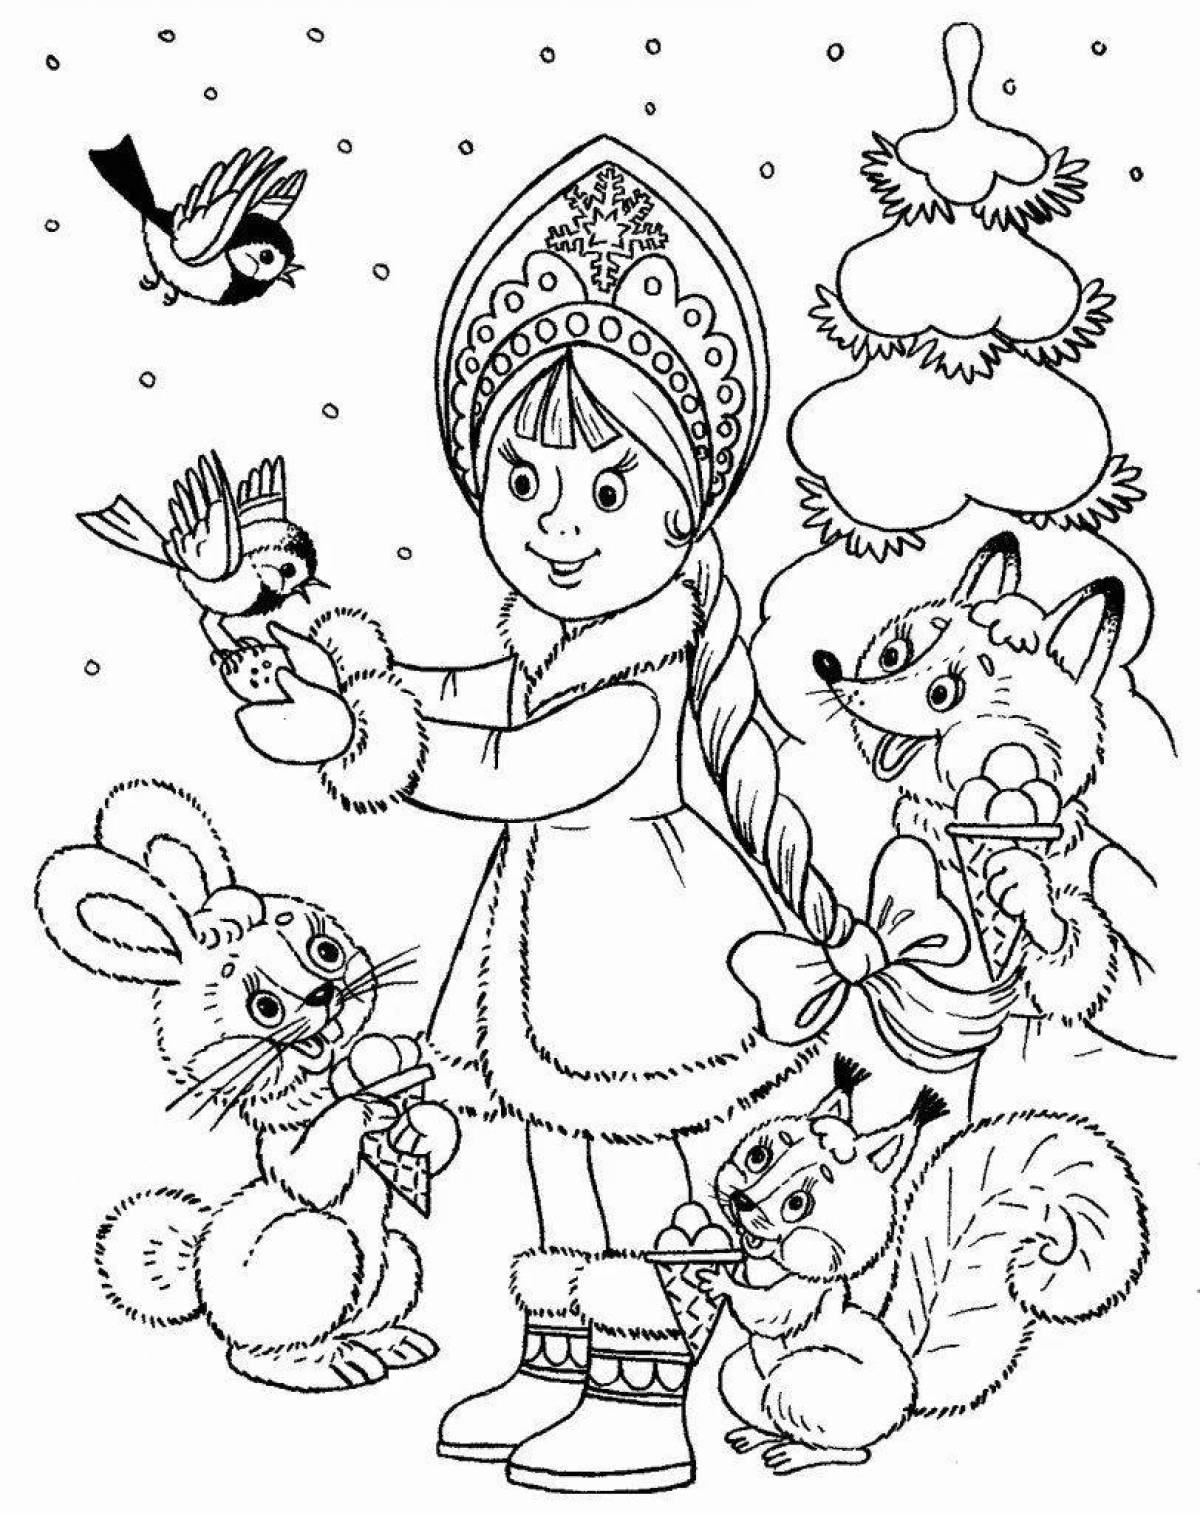 Coloring book funny Santa Claus and Snow Maiden